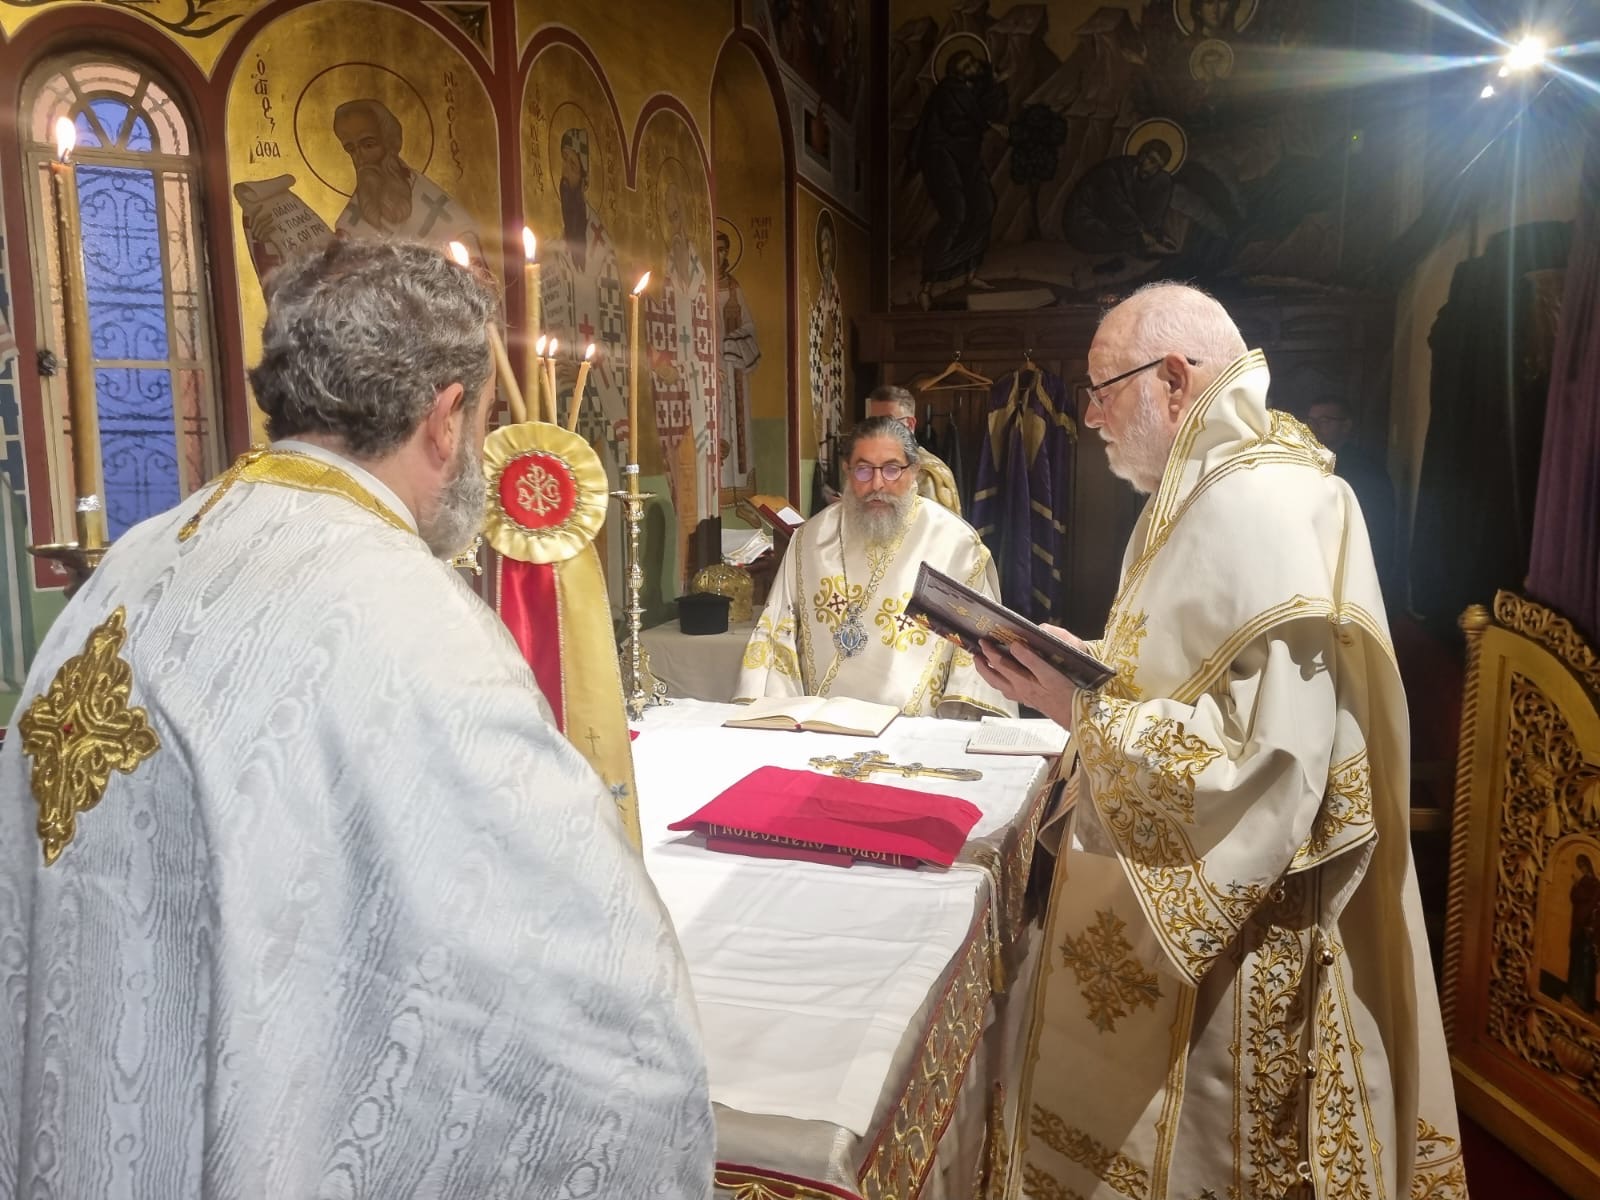 Melbourne: Feast Day of the Nativity of Christ at the Archdiocesan Church of Saint Eustathios